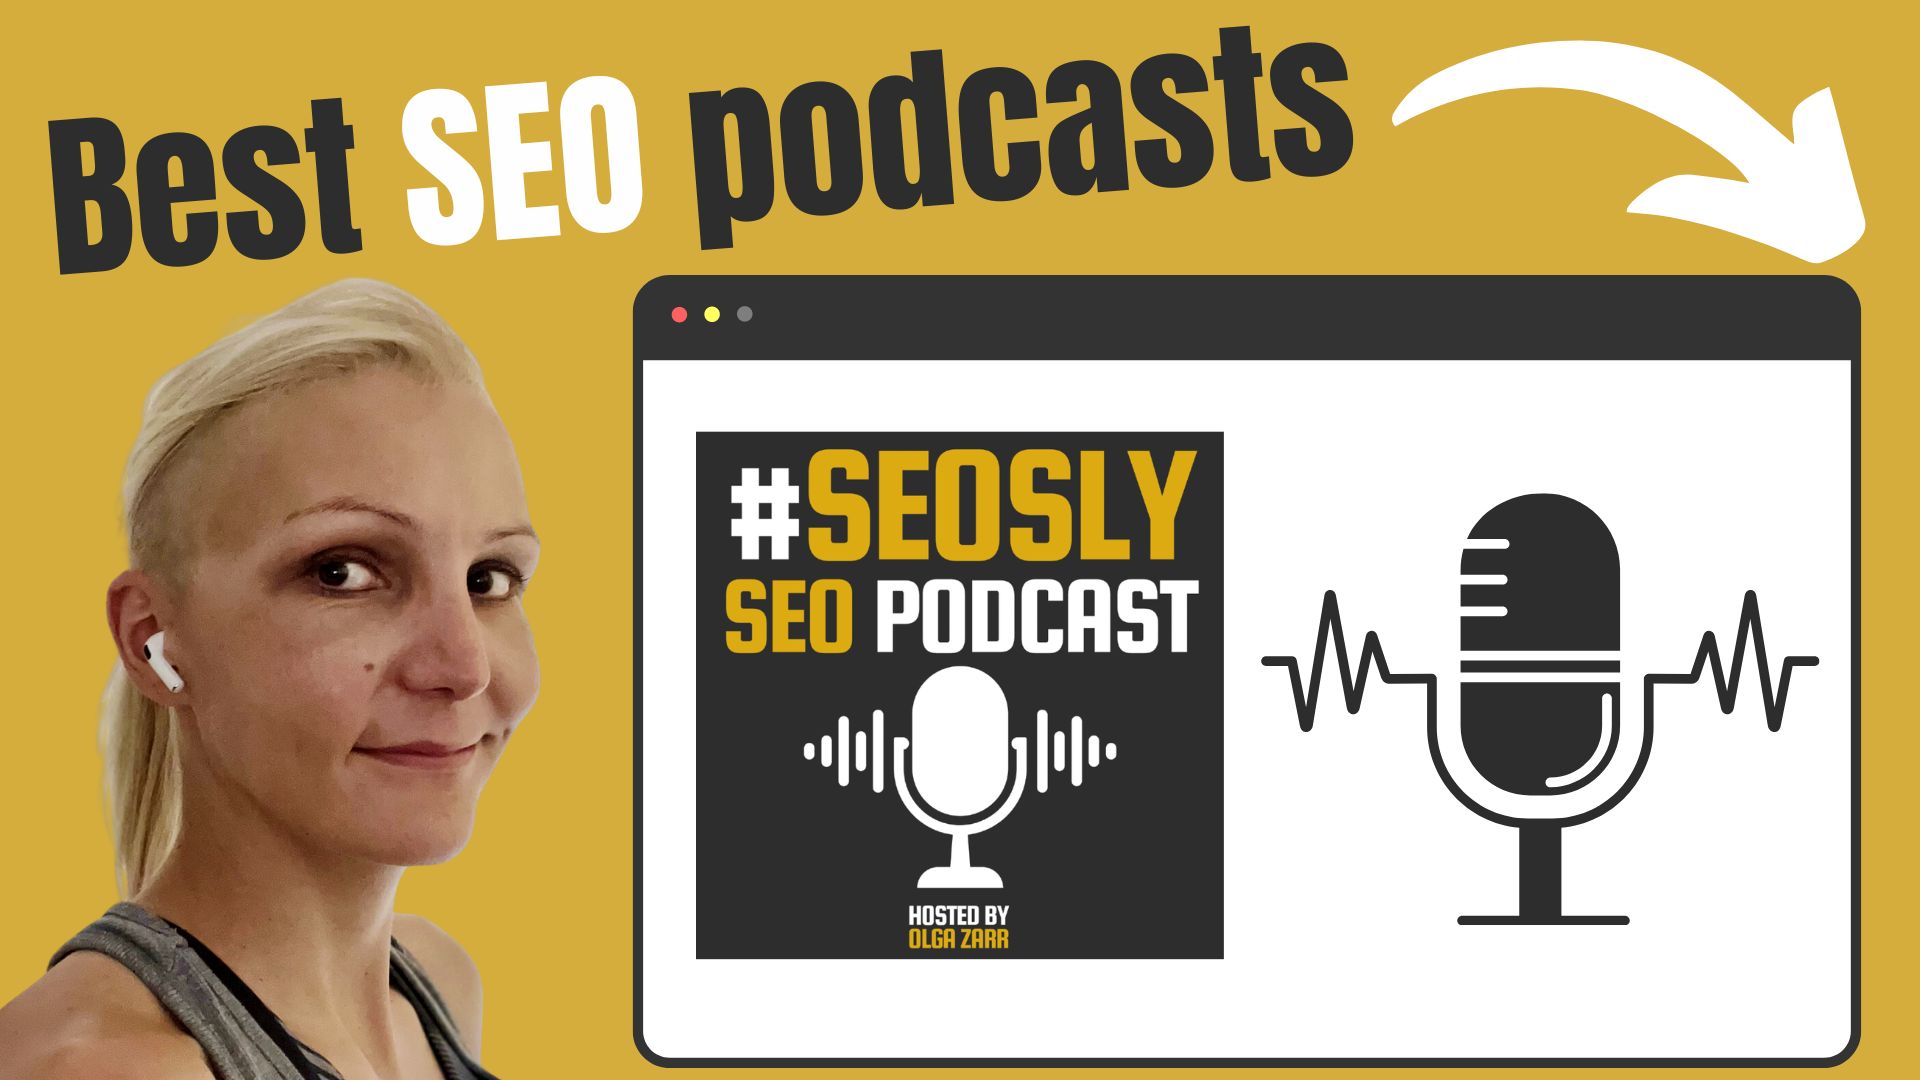 Best SEO Podcasts – 40+ Top SEO Podcasts To Listen – SEOSLY